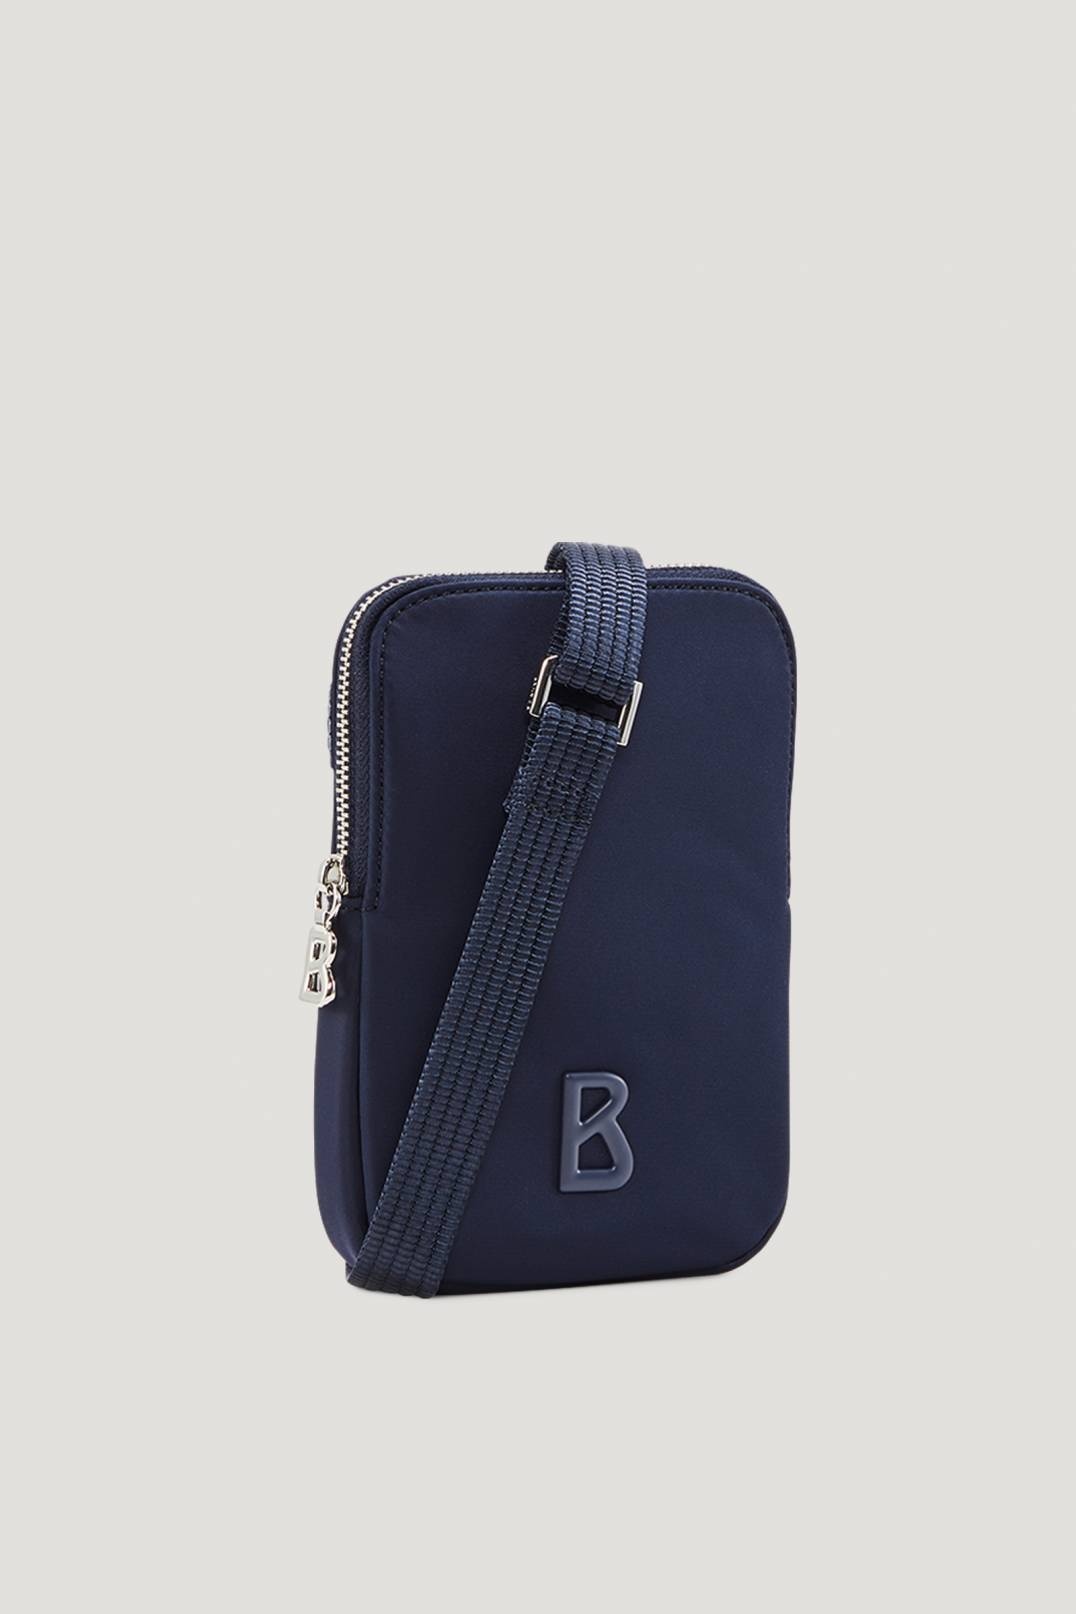 VERBIER PLAY JOHANNA SMARTPHONE POUCH IN NAVY BLUE - 2